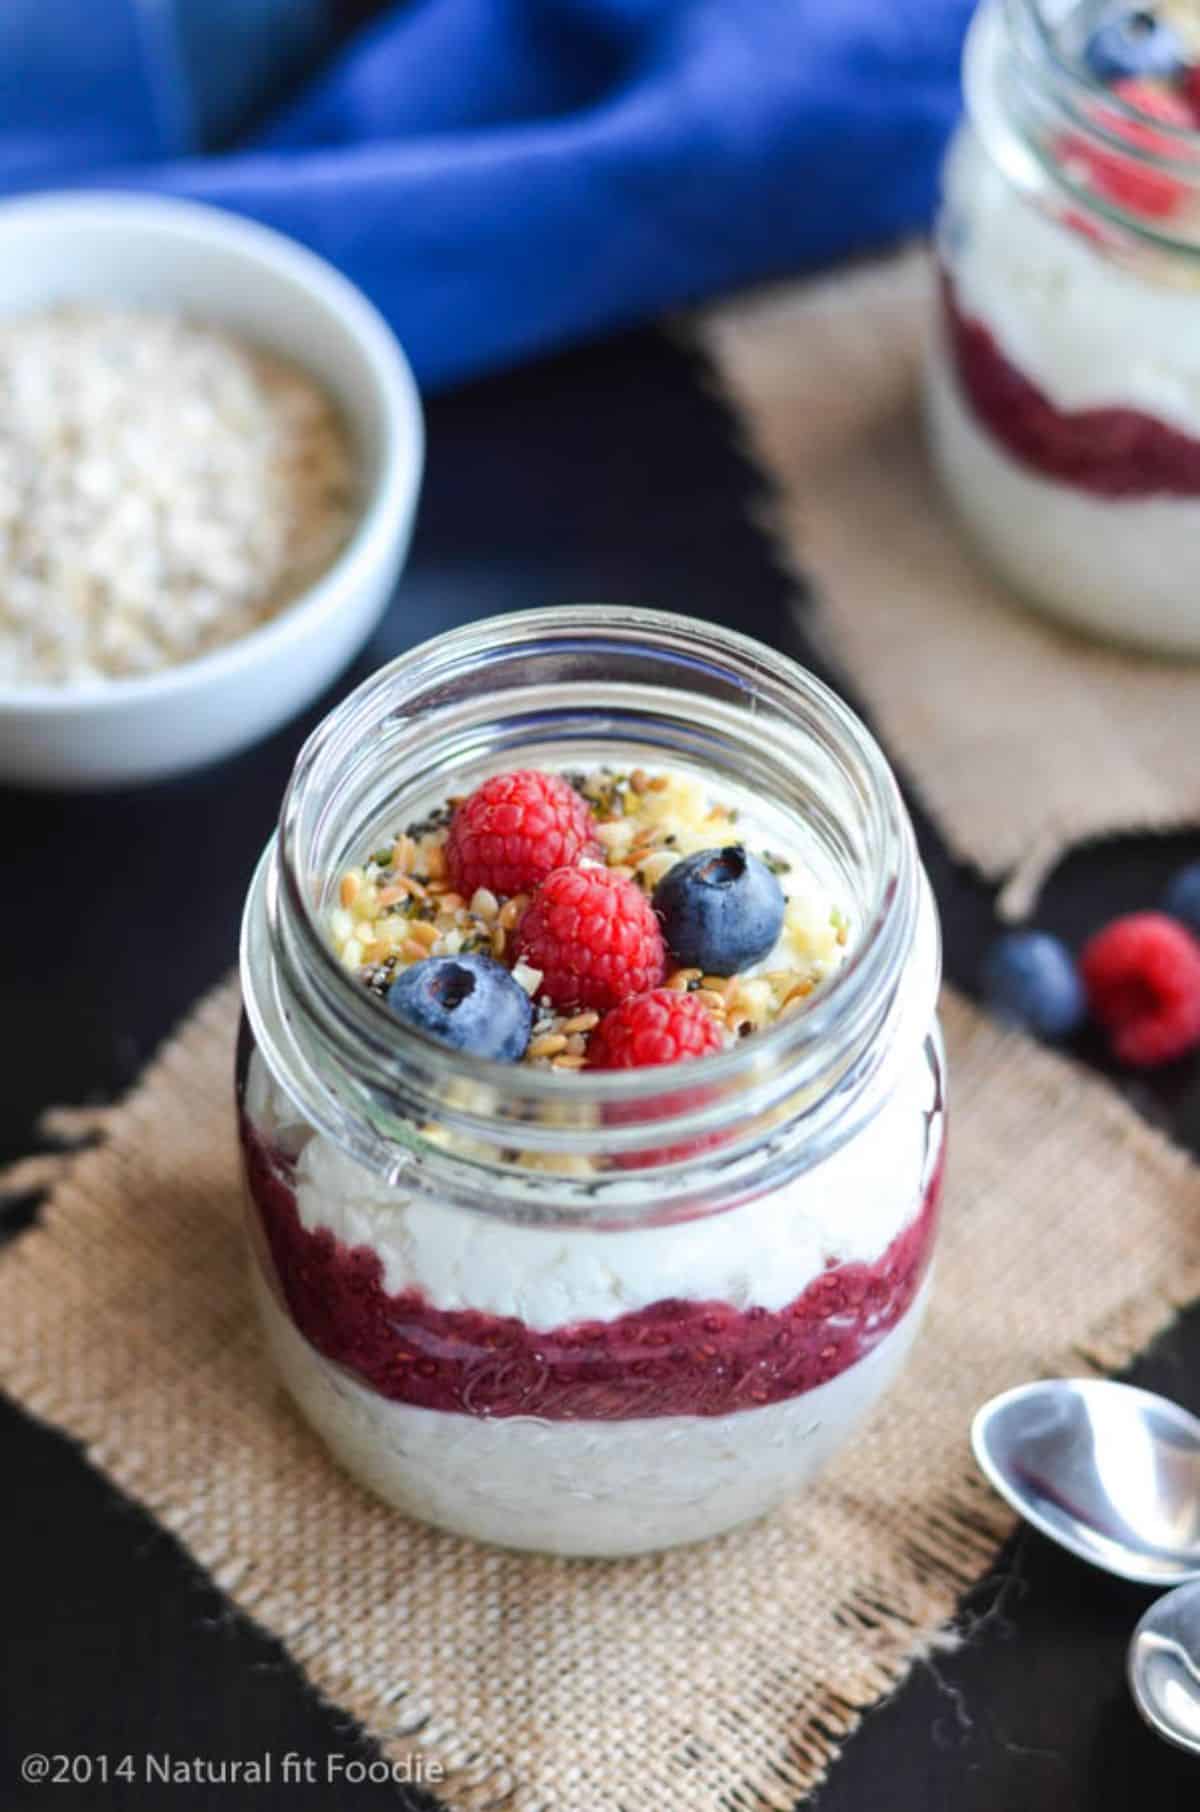 Blueberry Cottage Cheese Overnight Oats with fruits and nuts in a glass jar.